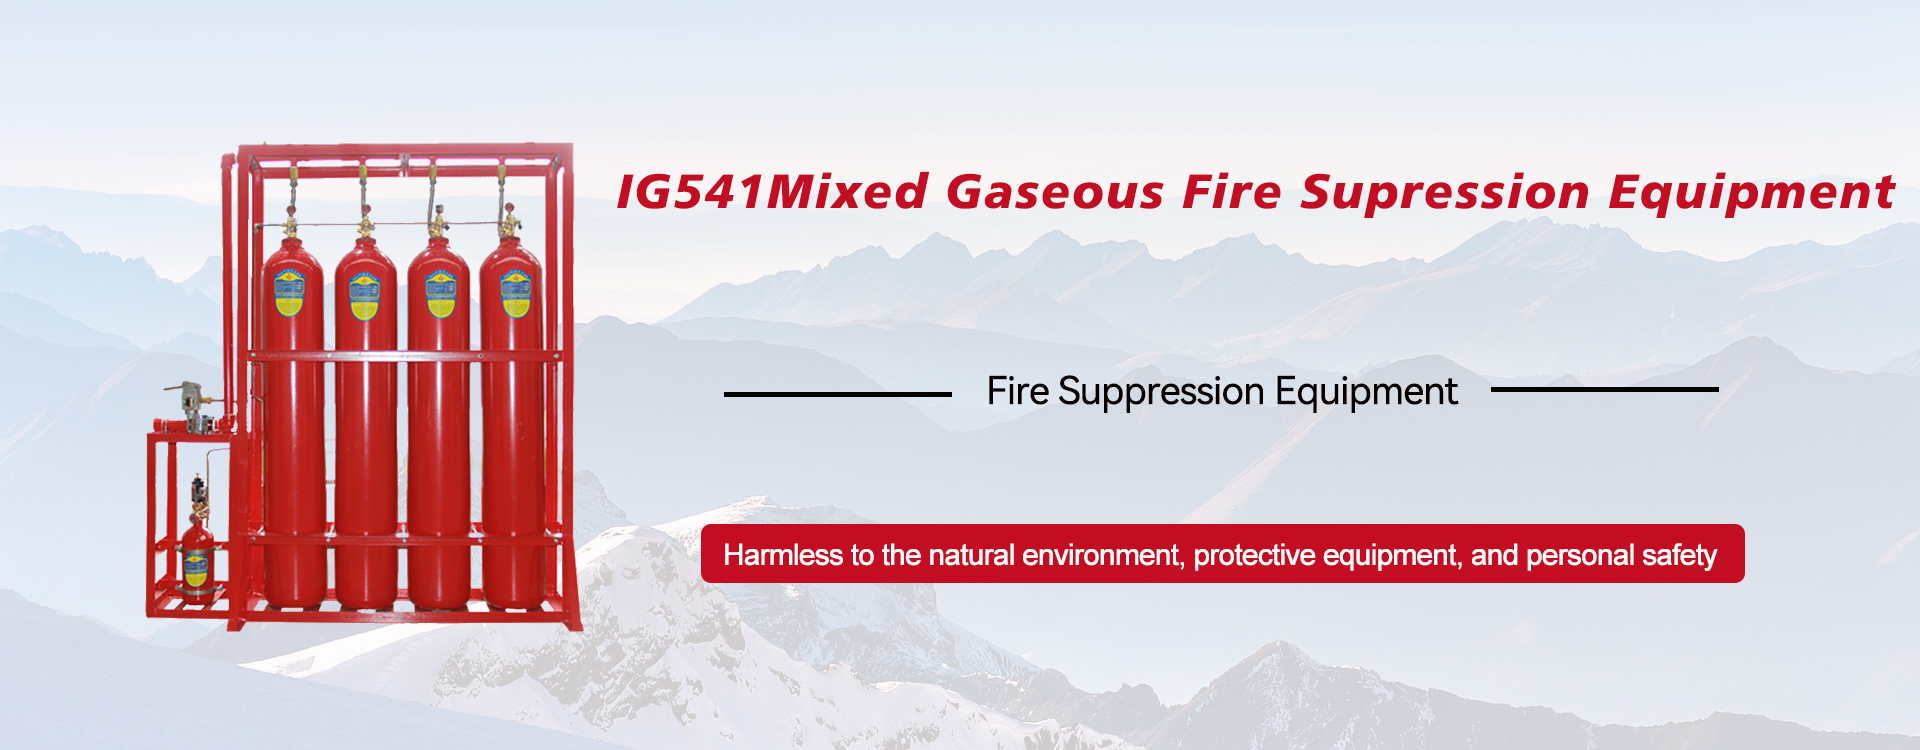 IG541 Mixed Gaseous Fire Supression Equipment